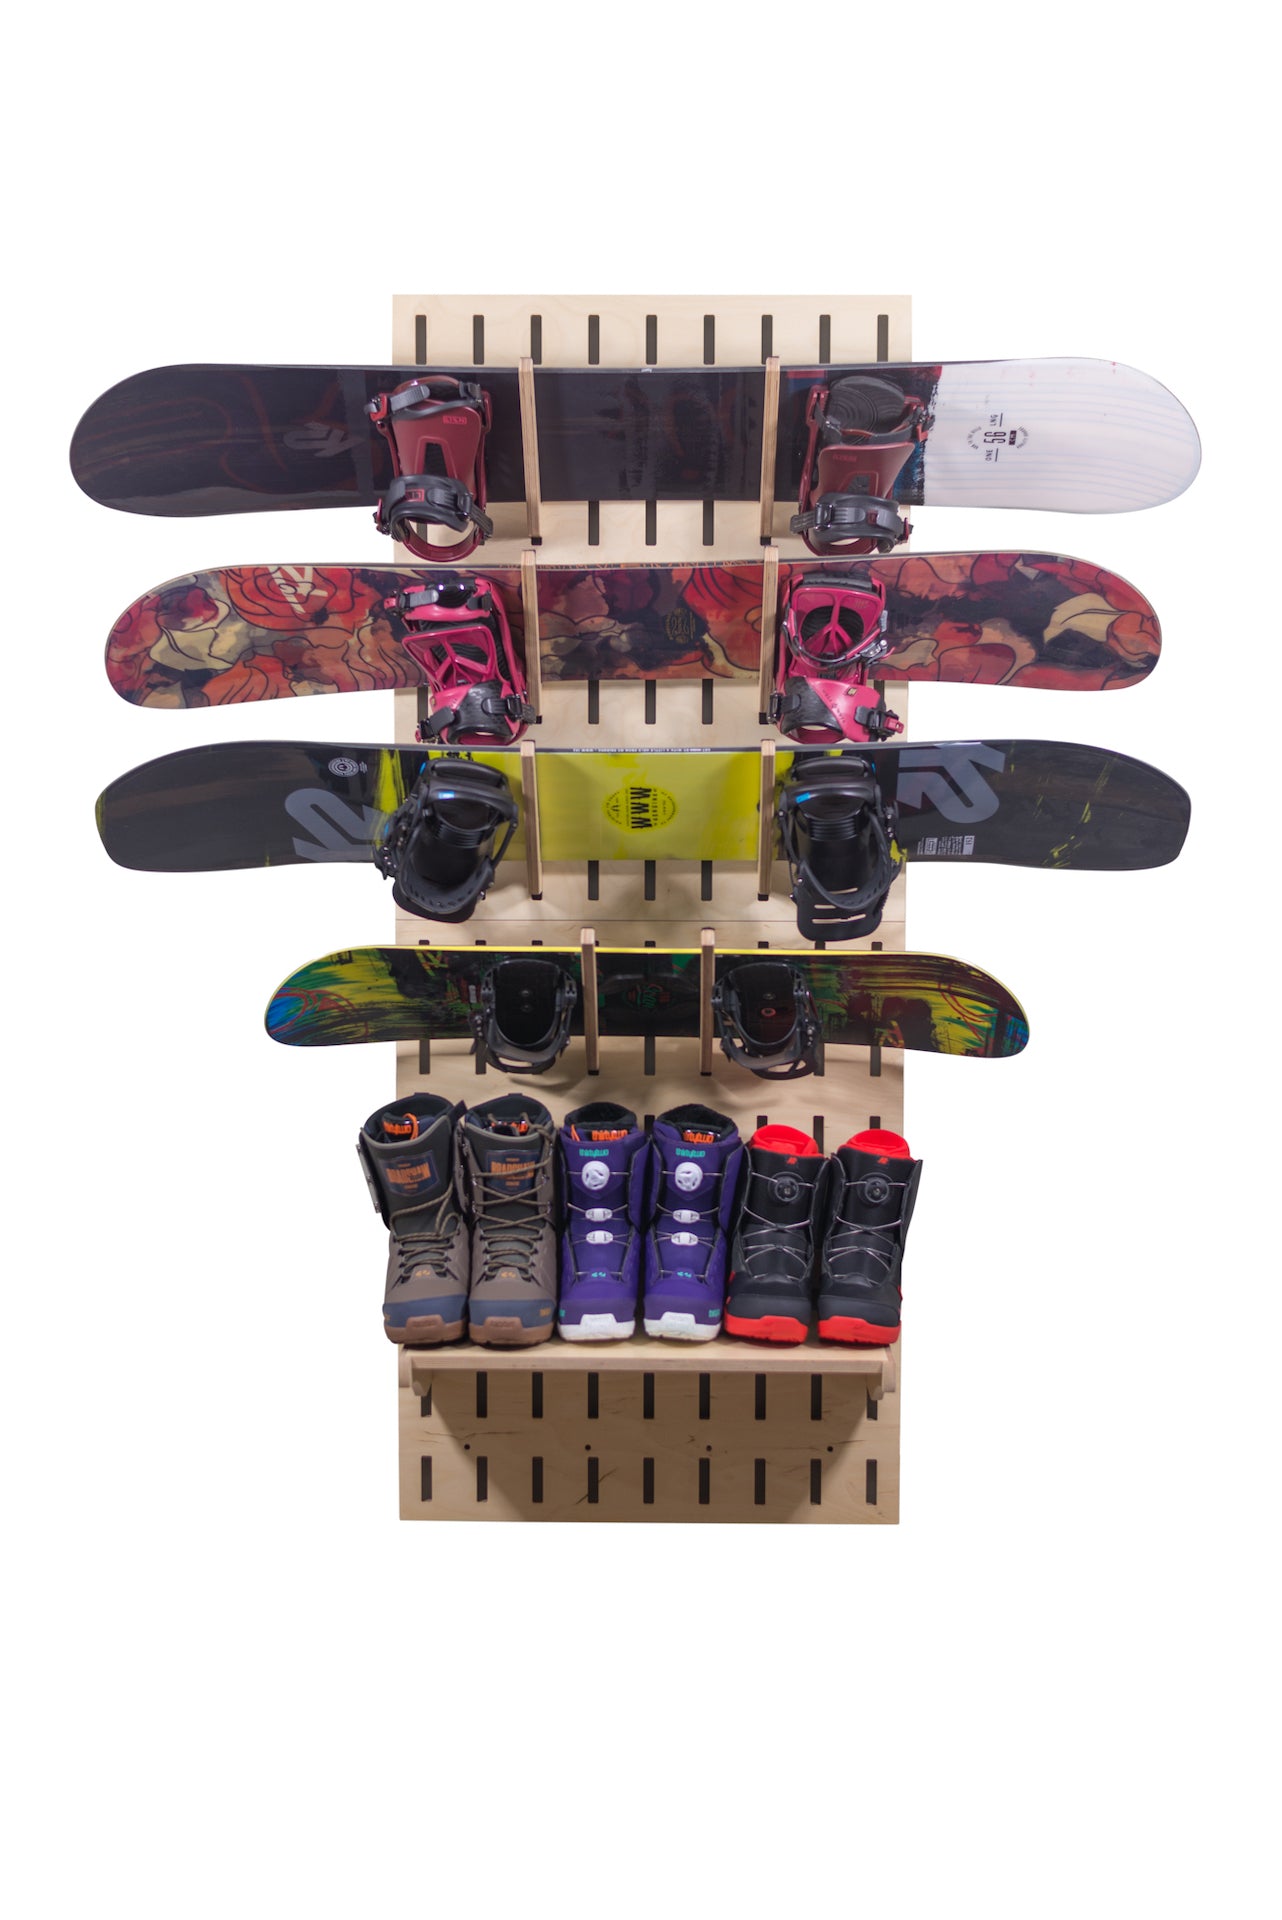 snowboard retail display and store fixture rack for home organization or retail store fixture